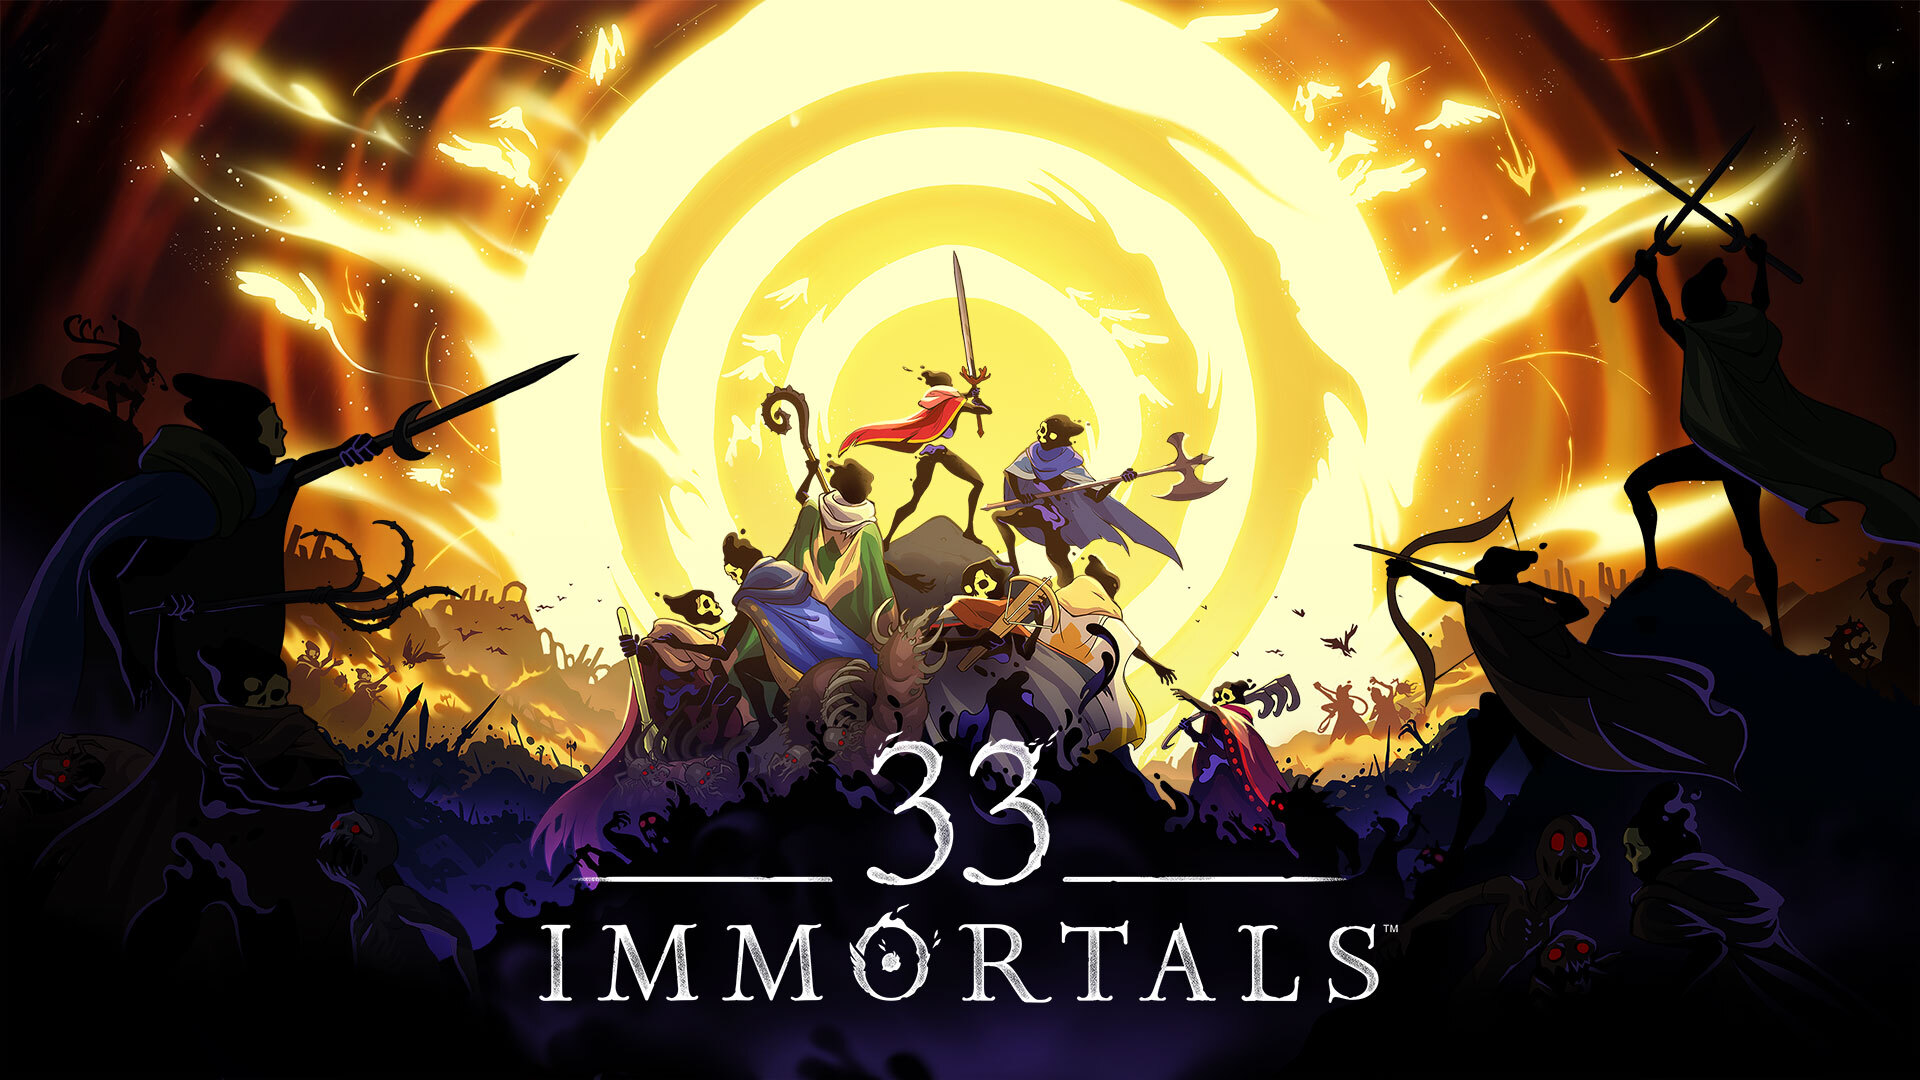 33 Immortals is a co-op action-roguelike for 33 players. Pick-up and raid, cooperate to survive hordes of monsters, and face the wrath of God.